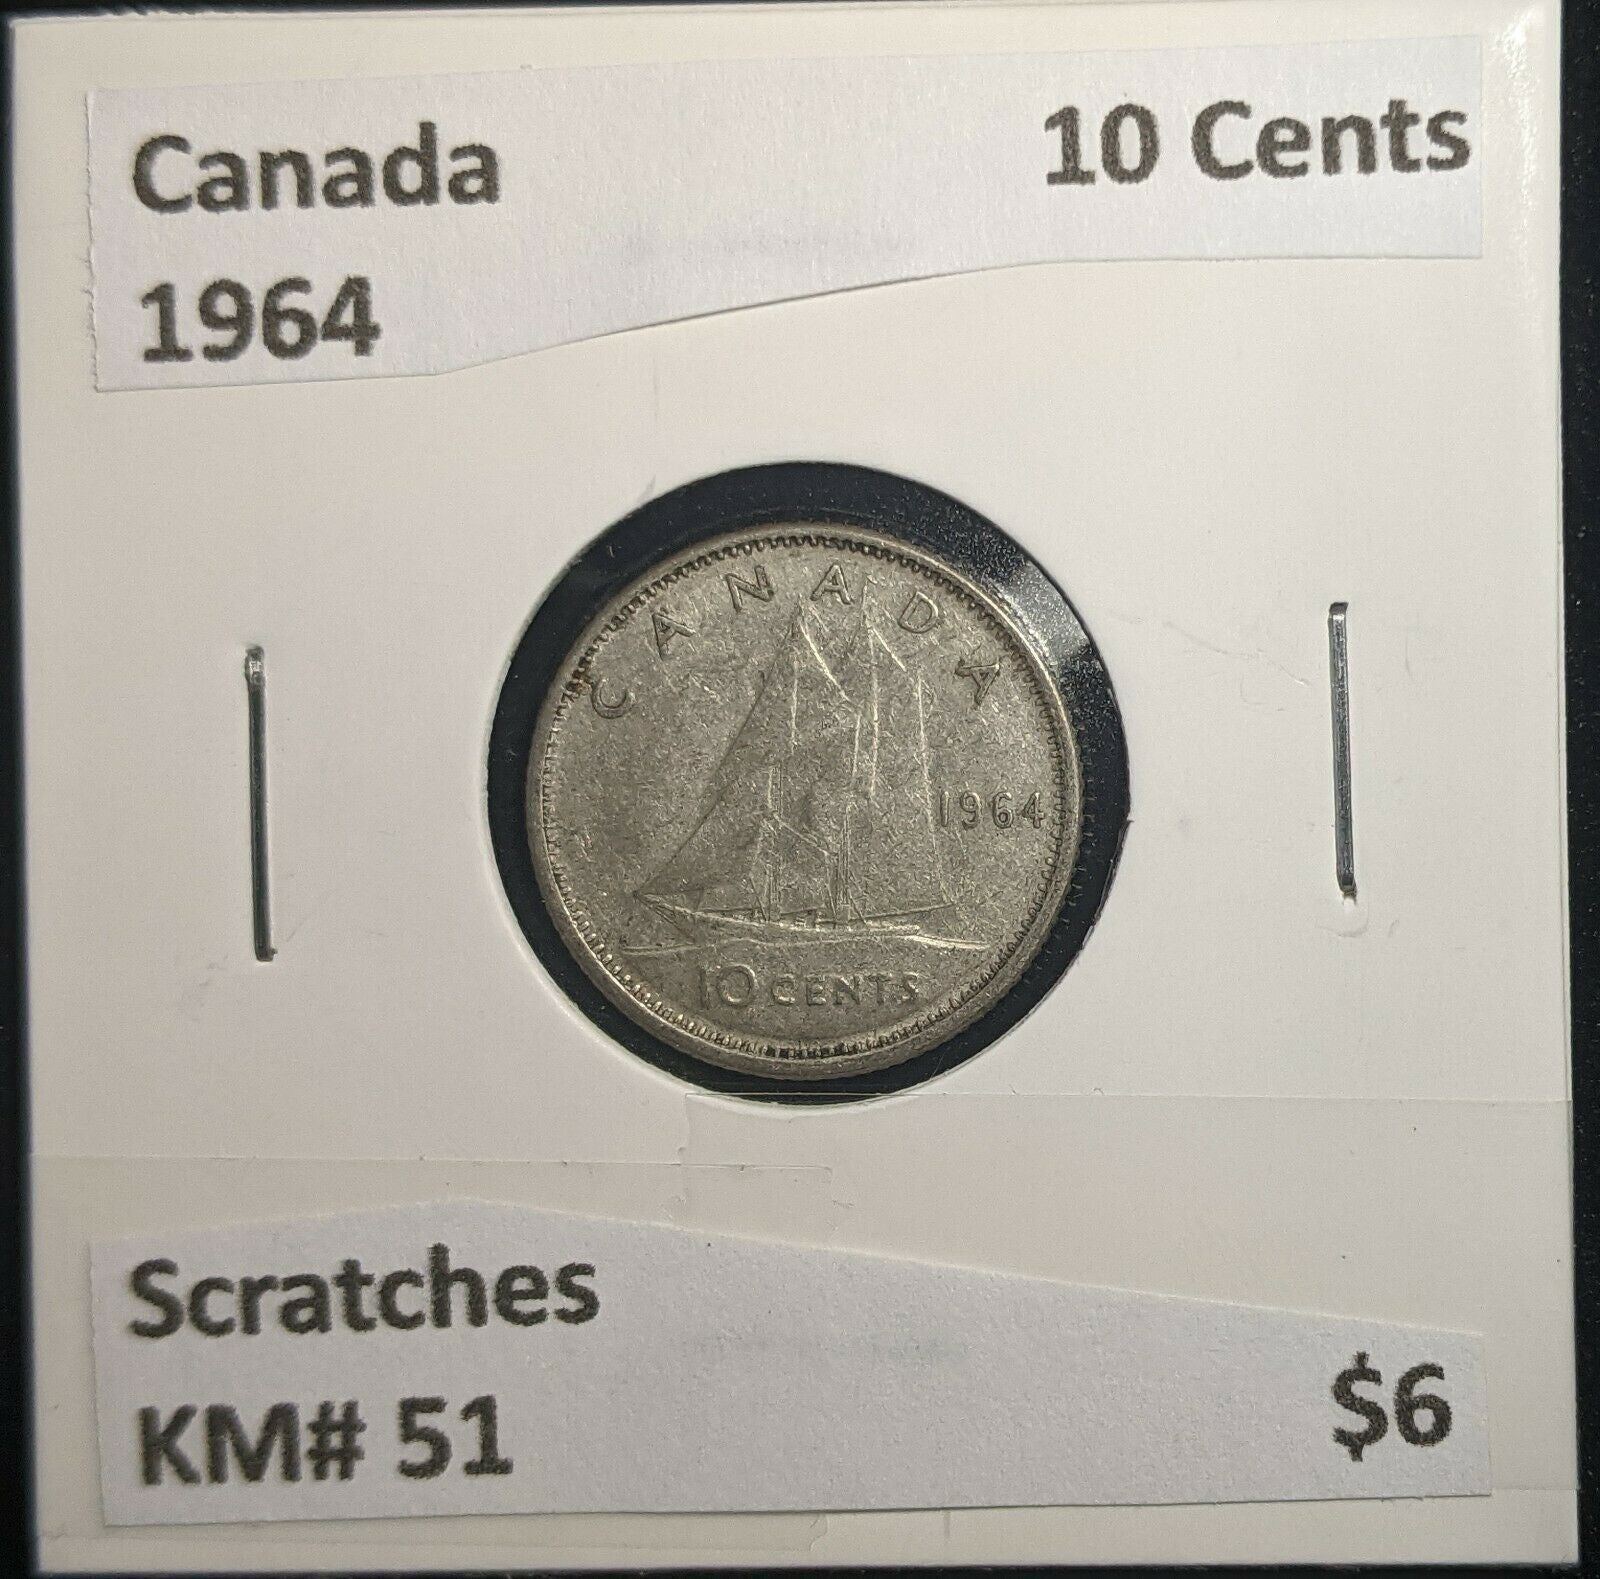 Canada 1964 10 Cents KM# 51 Scratches #491